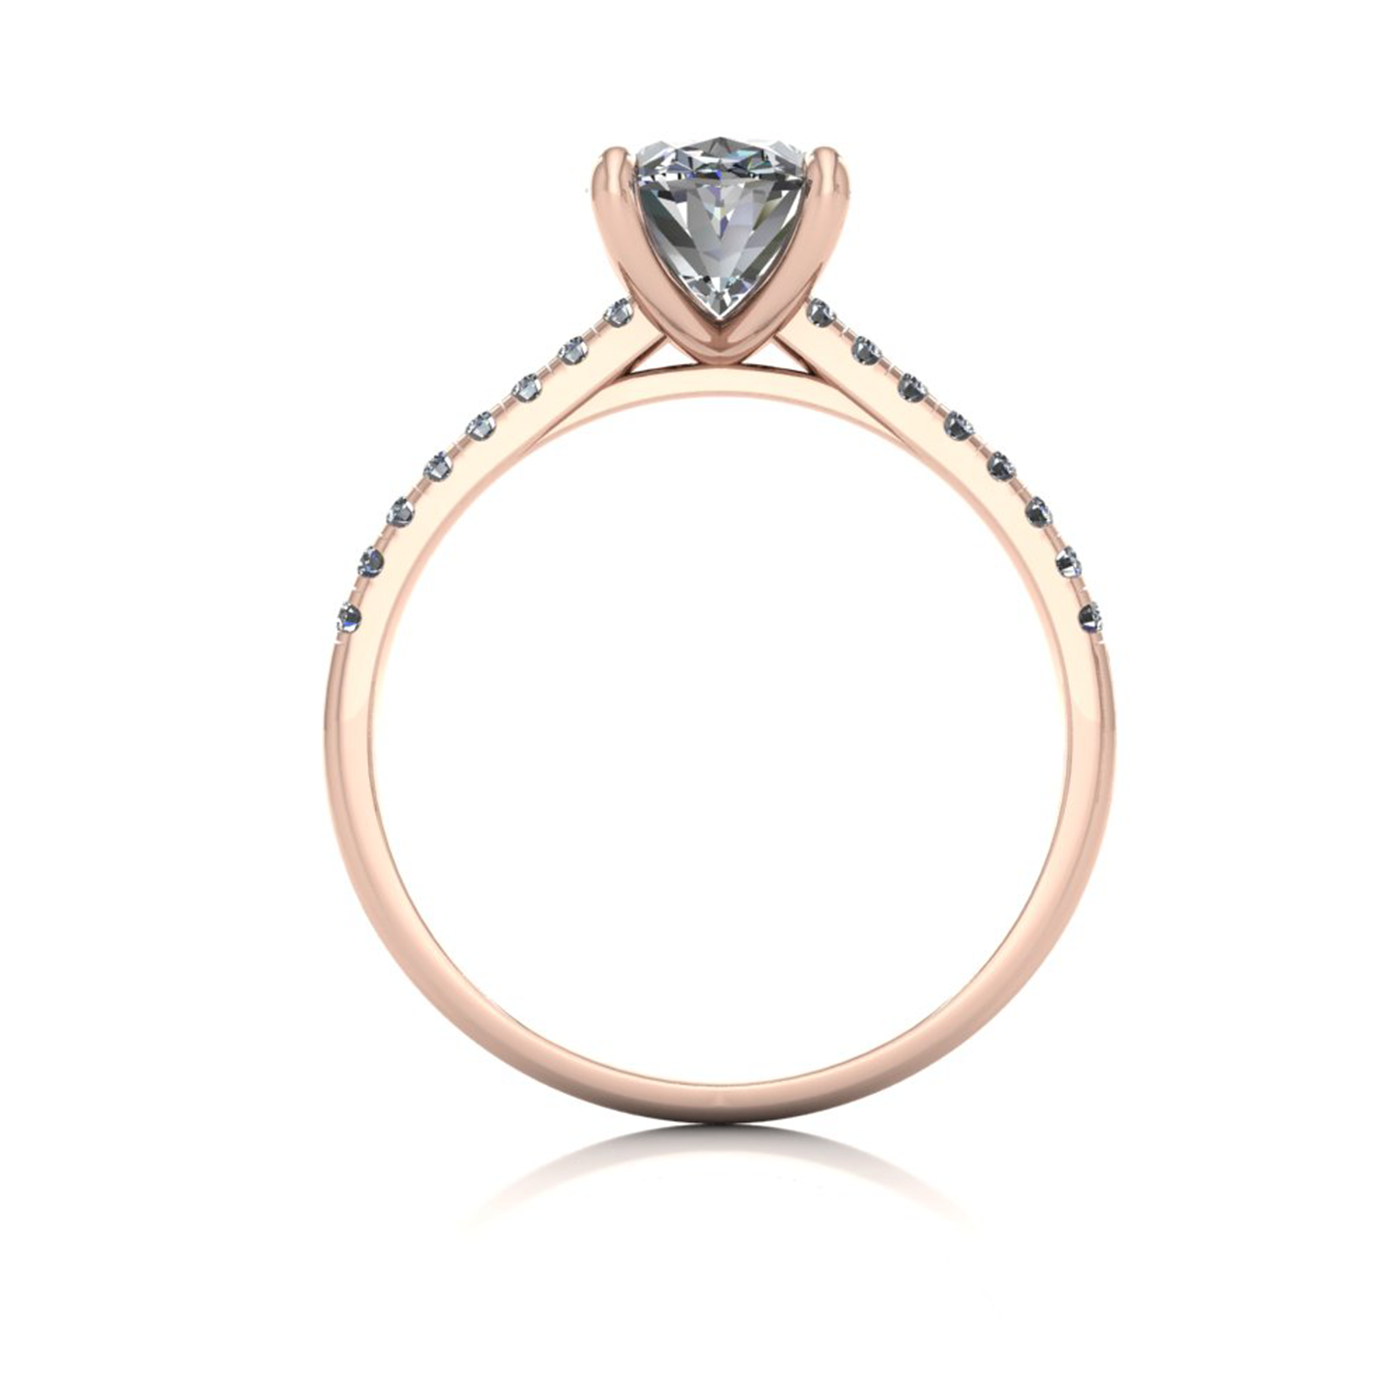 18k rose gold  1,50 ct 4 prongs oval cut diamond engagement ring with whisper thin pavÉ set band